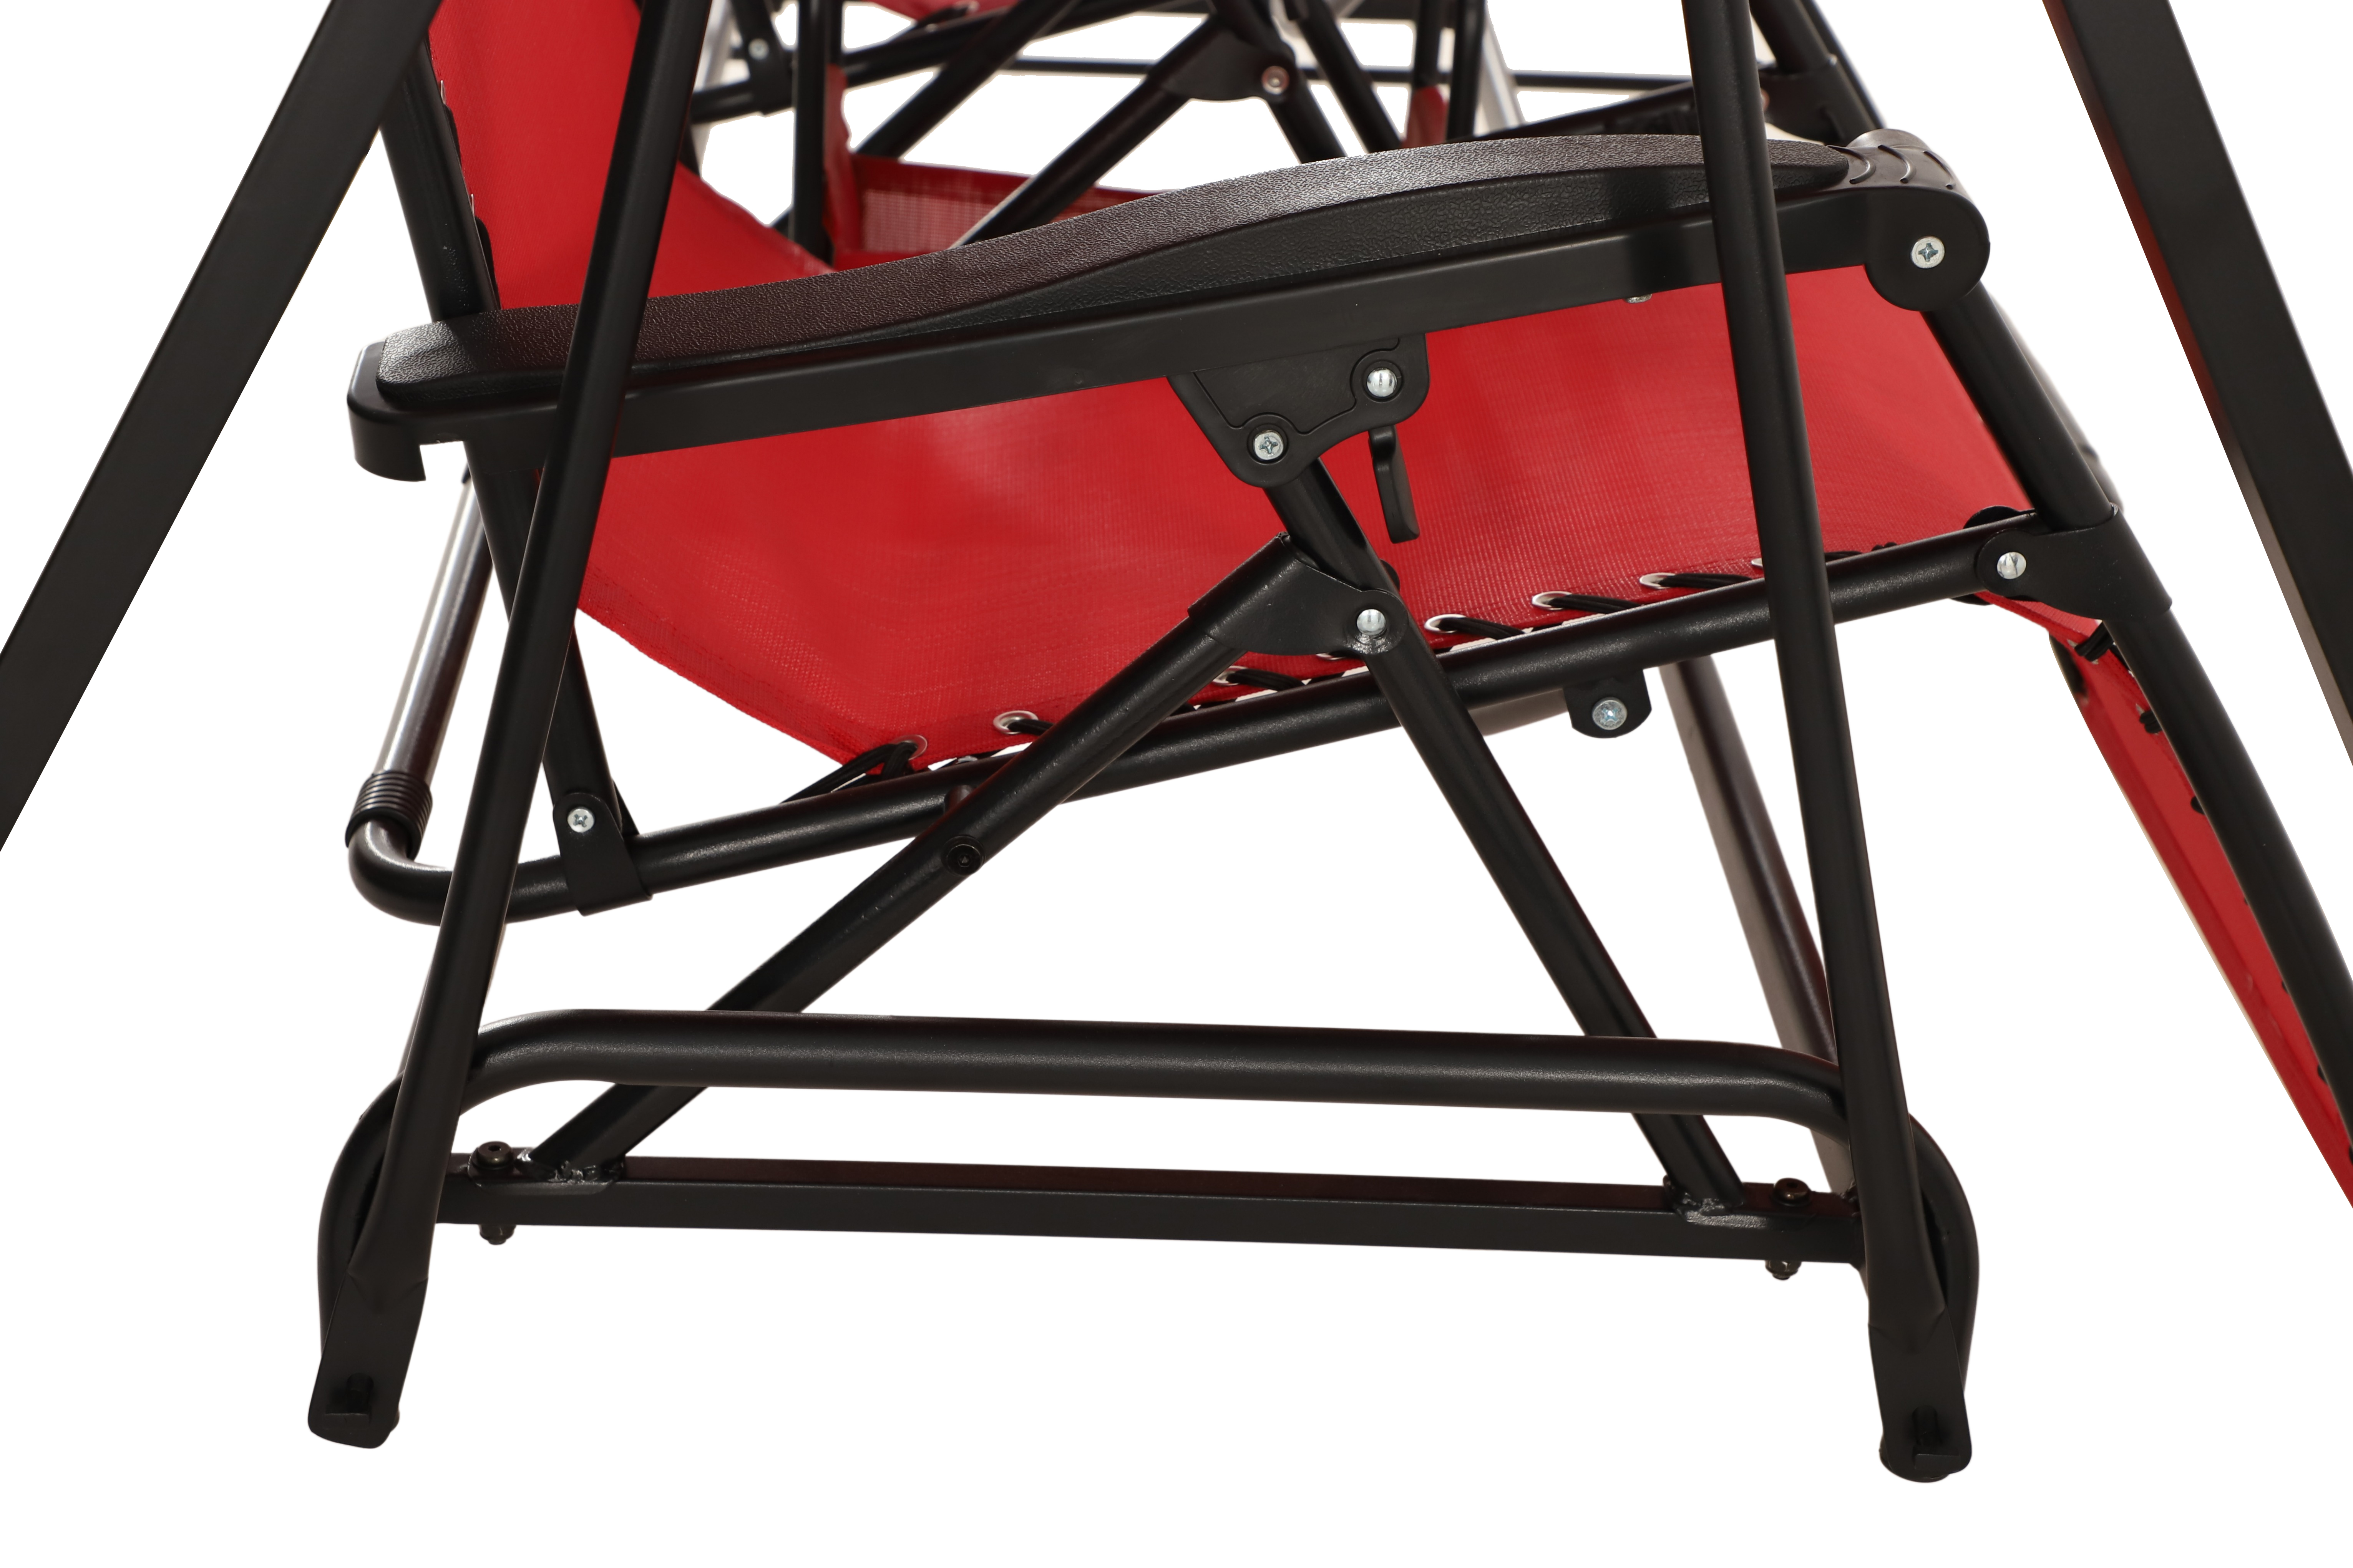 Mainstays 2-Seat Reclining Oversized Zero-Gravity Swing with Canopy and Center Storage Console, Red/Black - image 7 of 9